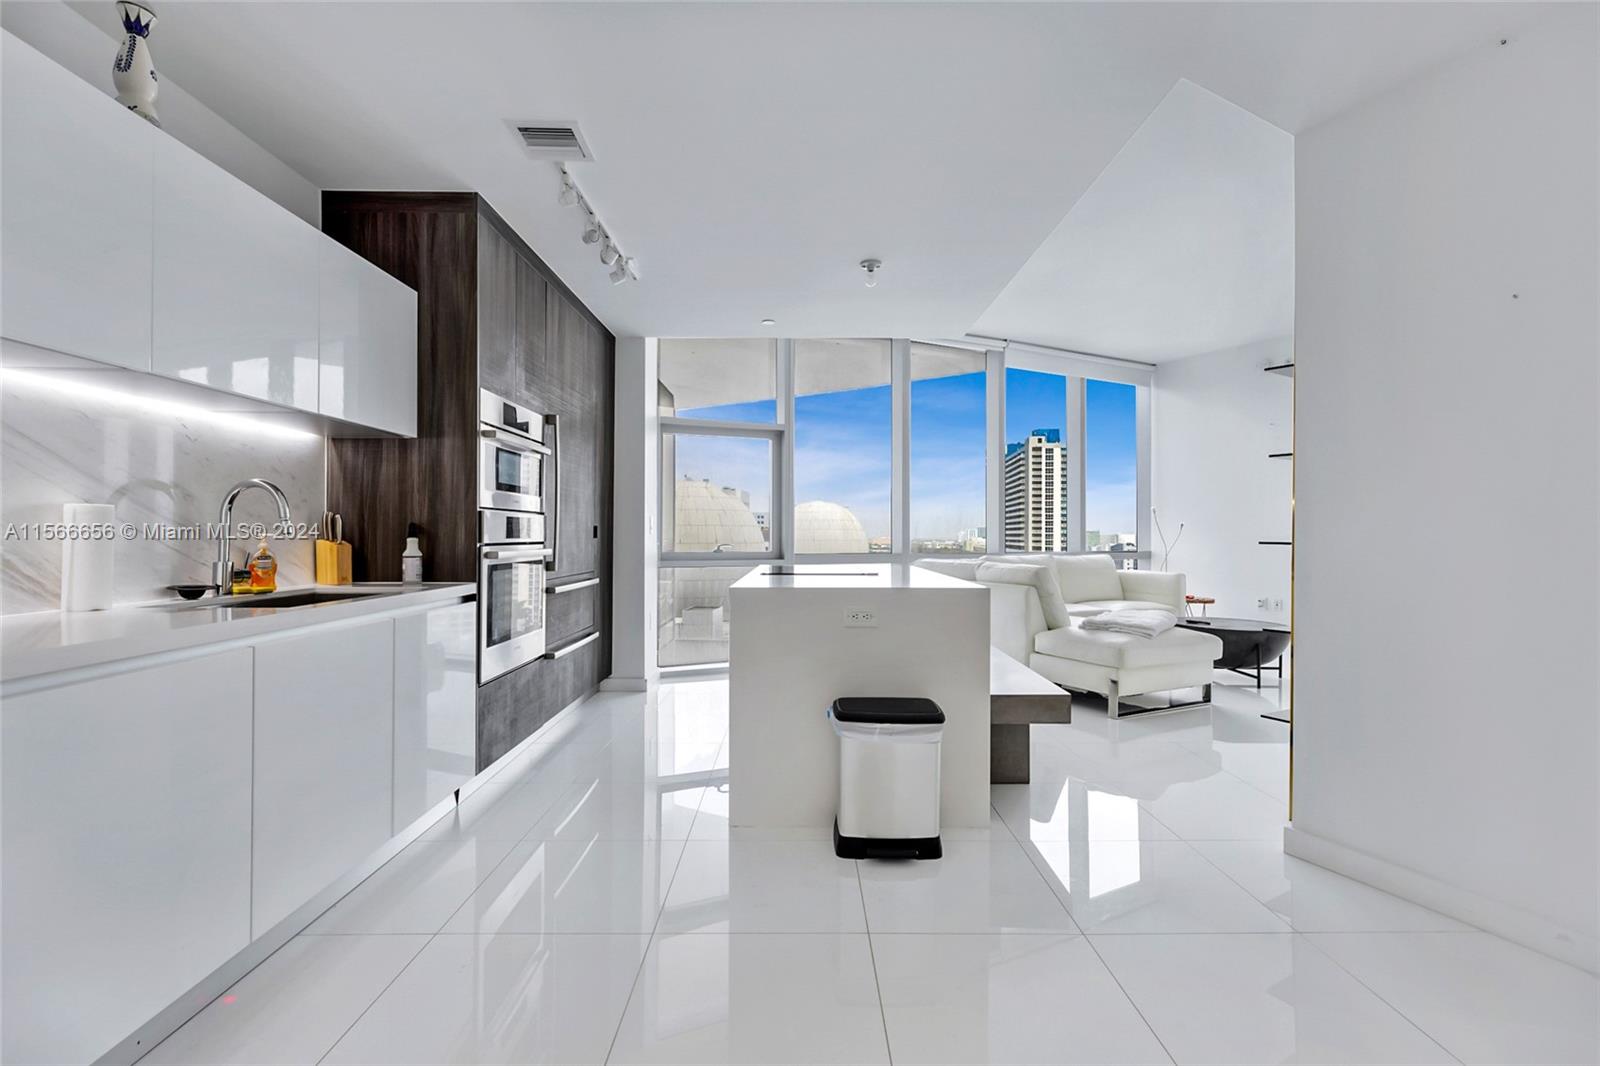 Perfect location In Hard Downtown Miami World Center HIGH CEILINGS 10' WITH A FLOOR TO CEILING WINDOWS ITALIAN KITCHEN AND TOP OF THE LINE APPLIANCES BOSH MARBLE FLOOR Most Amenities in the World including Basketball Court, 5 pools, Spa, Gym with boxing area, Bbq Kitchen, Virtual Golf, Recording Studio, Racquetball, Yoga, Sunrise pool, & Kids Play Area. Skydeck, Observatory to view stars with telescopes, Tennis courts, and Jacuzzi. EASY TO SHOW.